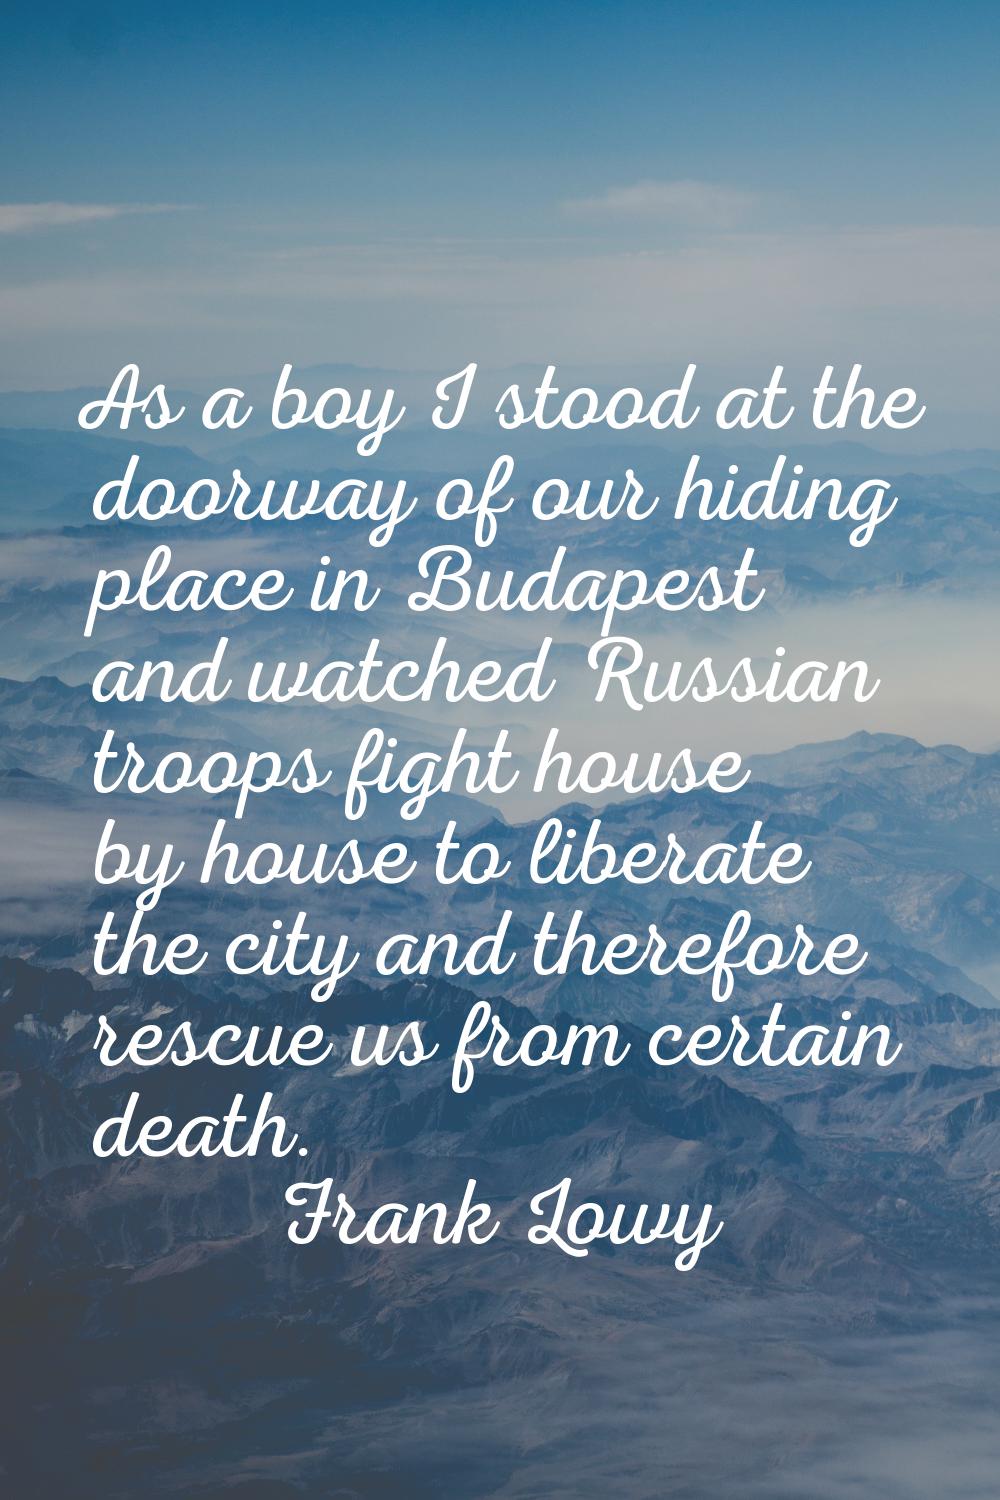 As a boy I stood at the doorway of our hiding place in Budapest and watched Russian troops fight ho